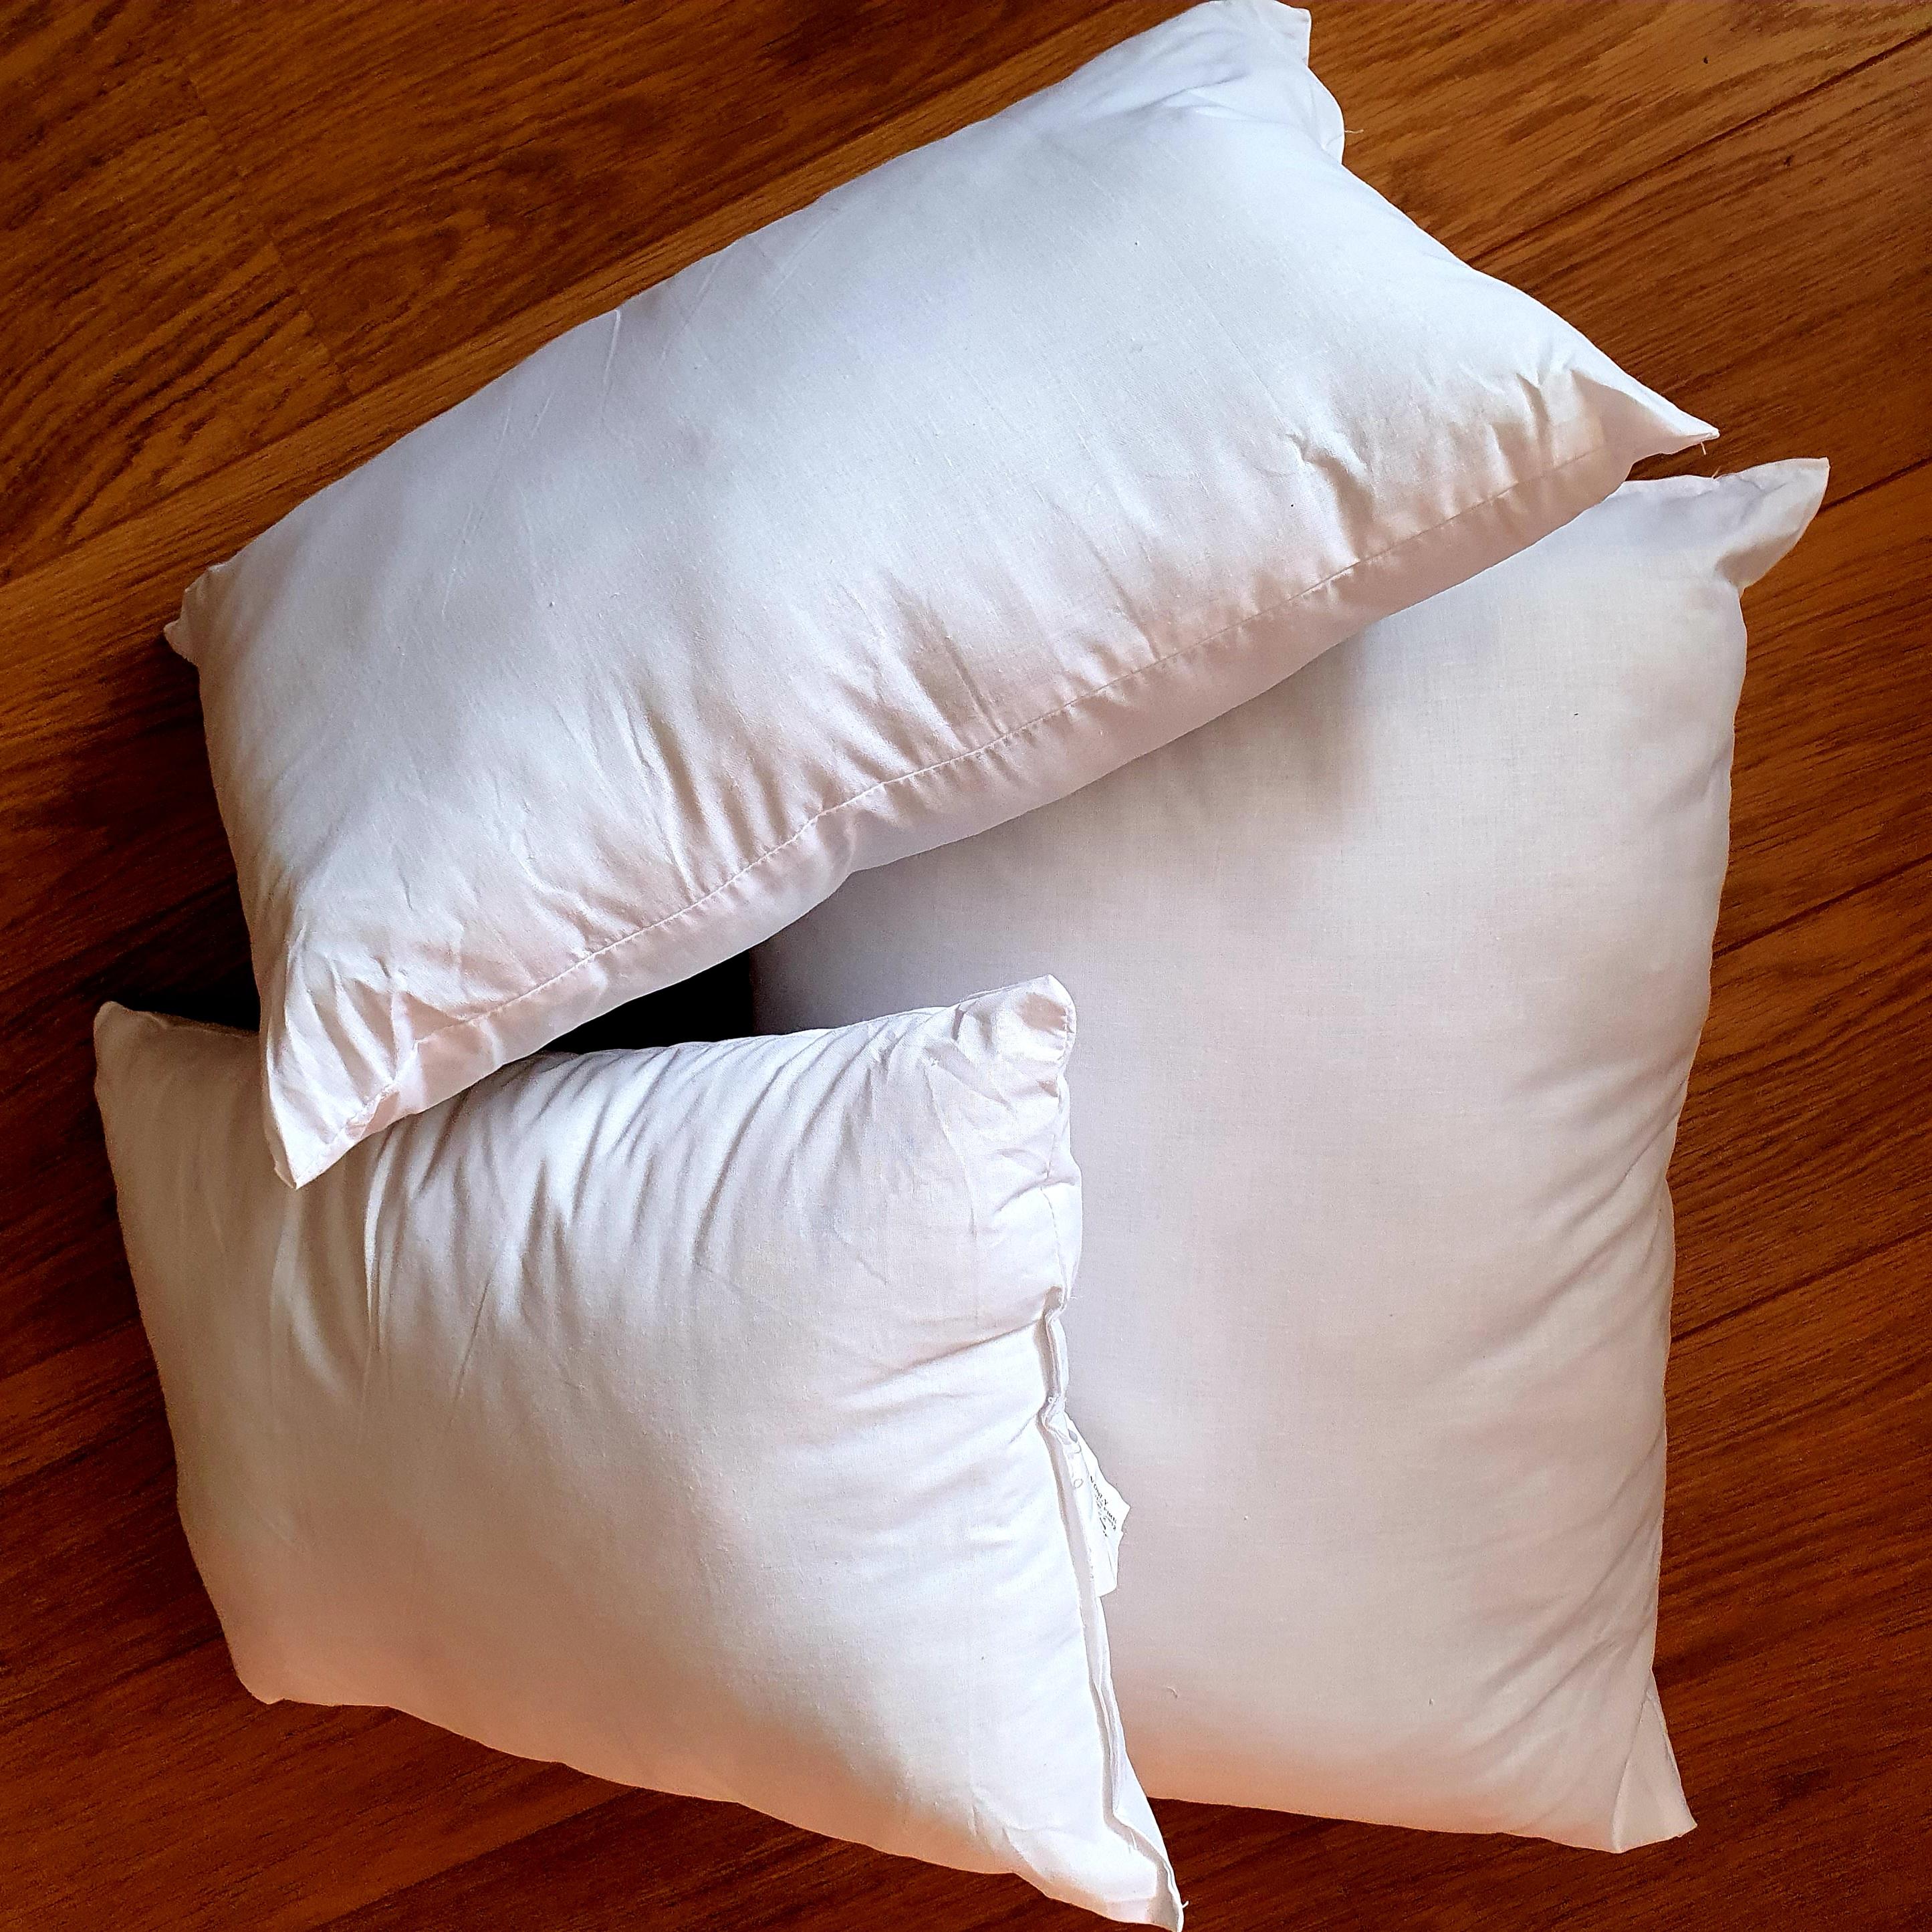 Group shot of cushion inner pads generously filled with Eco-Hollowfibre made from recycled plastic bottles in white poly cotton outer cover.